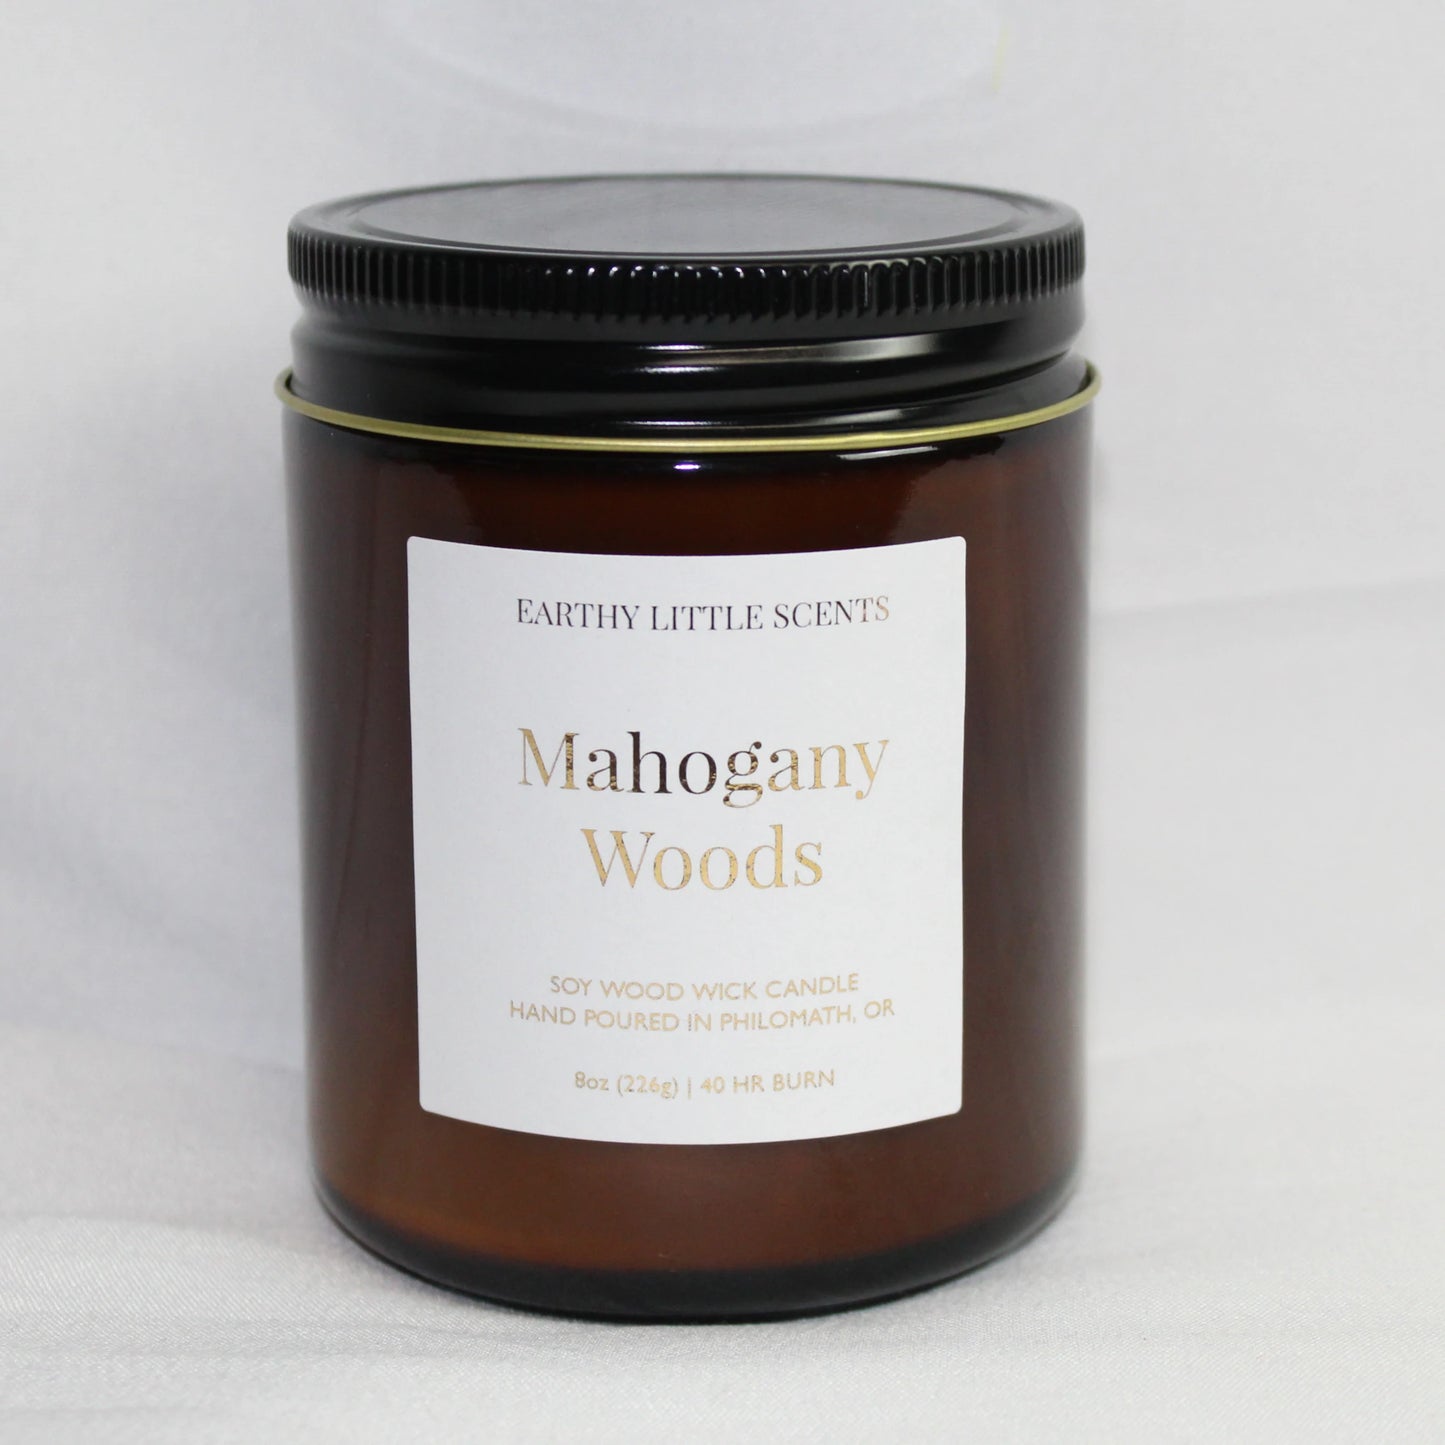 Mahogany Woods Soy Wood Wick Candle